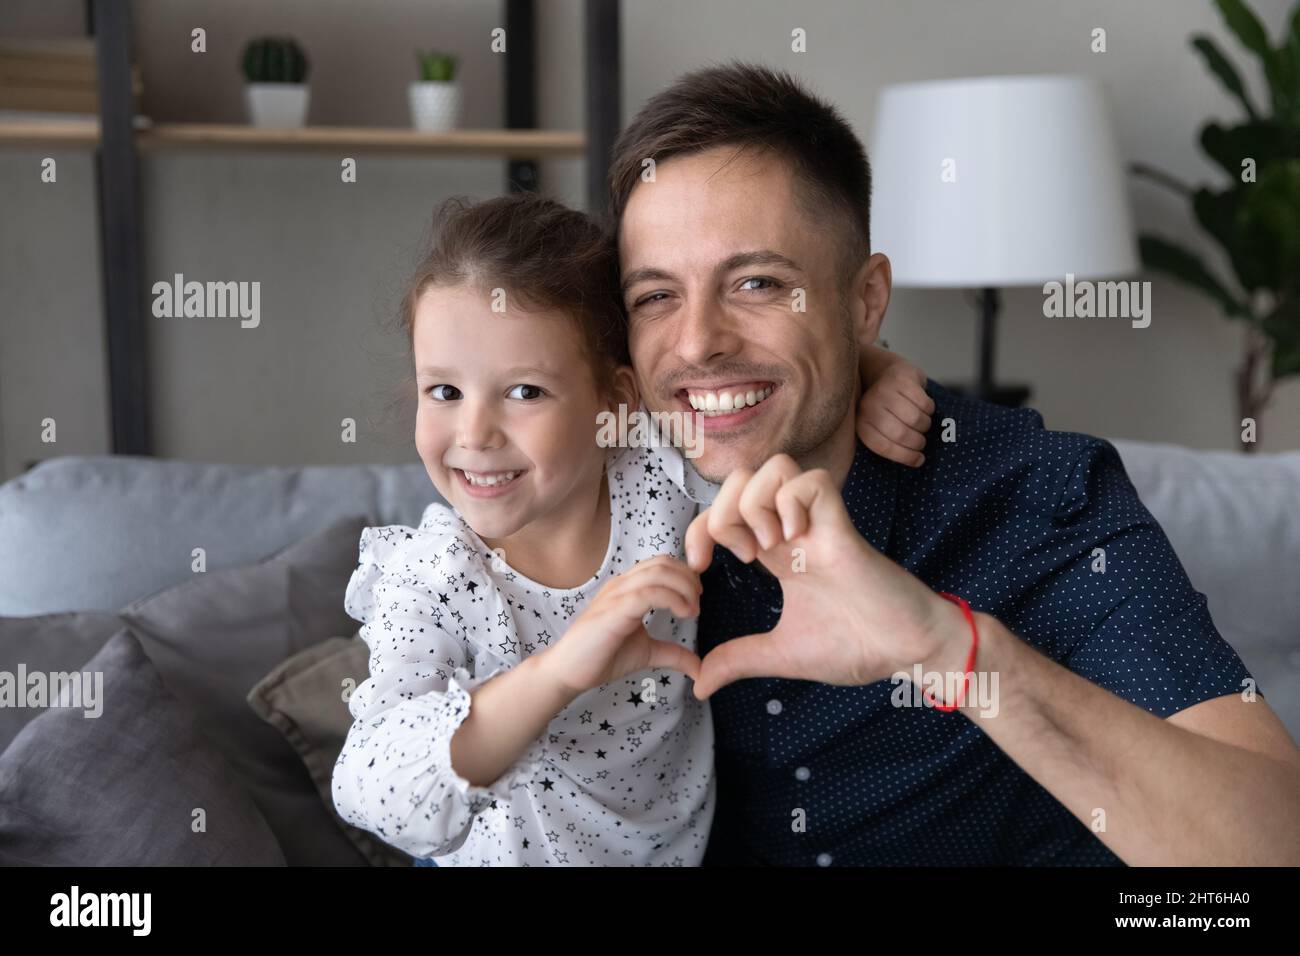 Happy small kid making heart symbol with father. Stock Photo